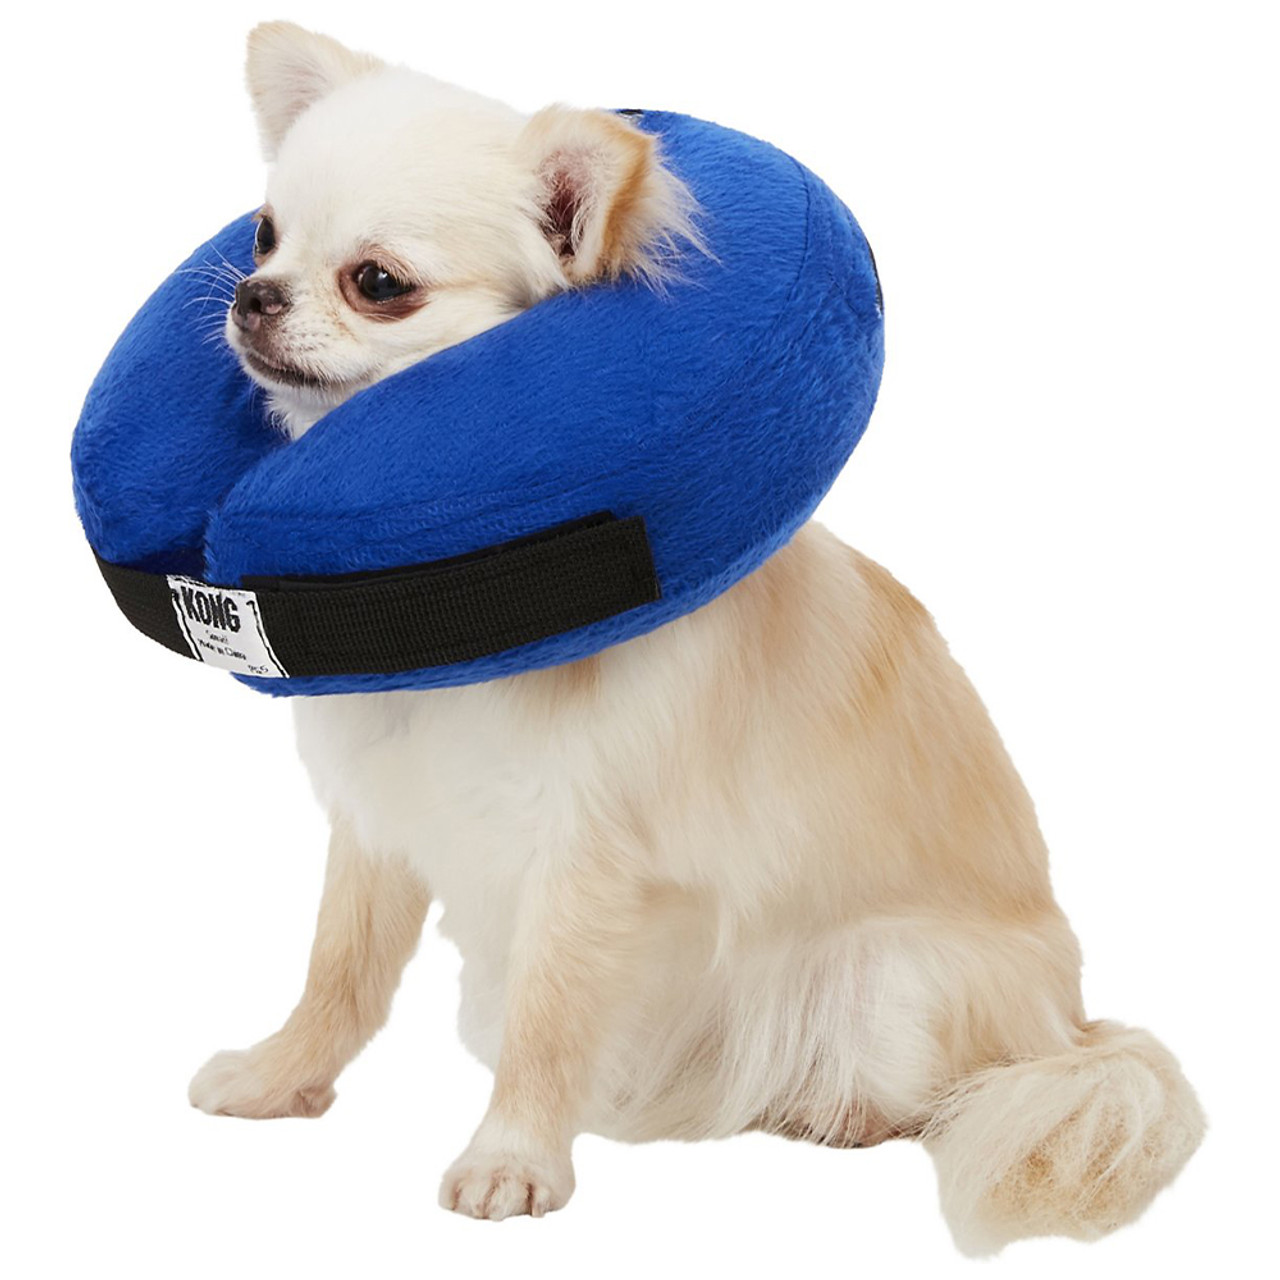 Kong Cloud Collar for Dogs & Cats, Small